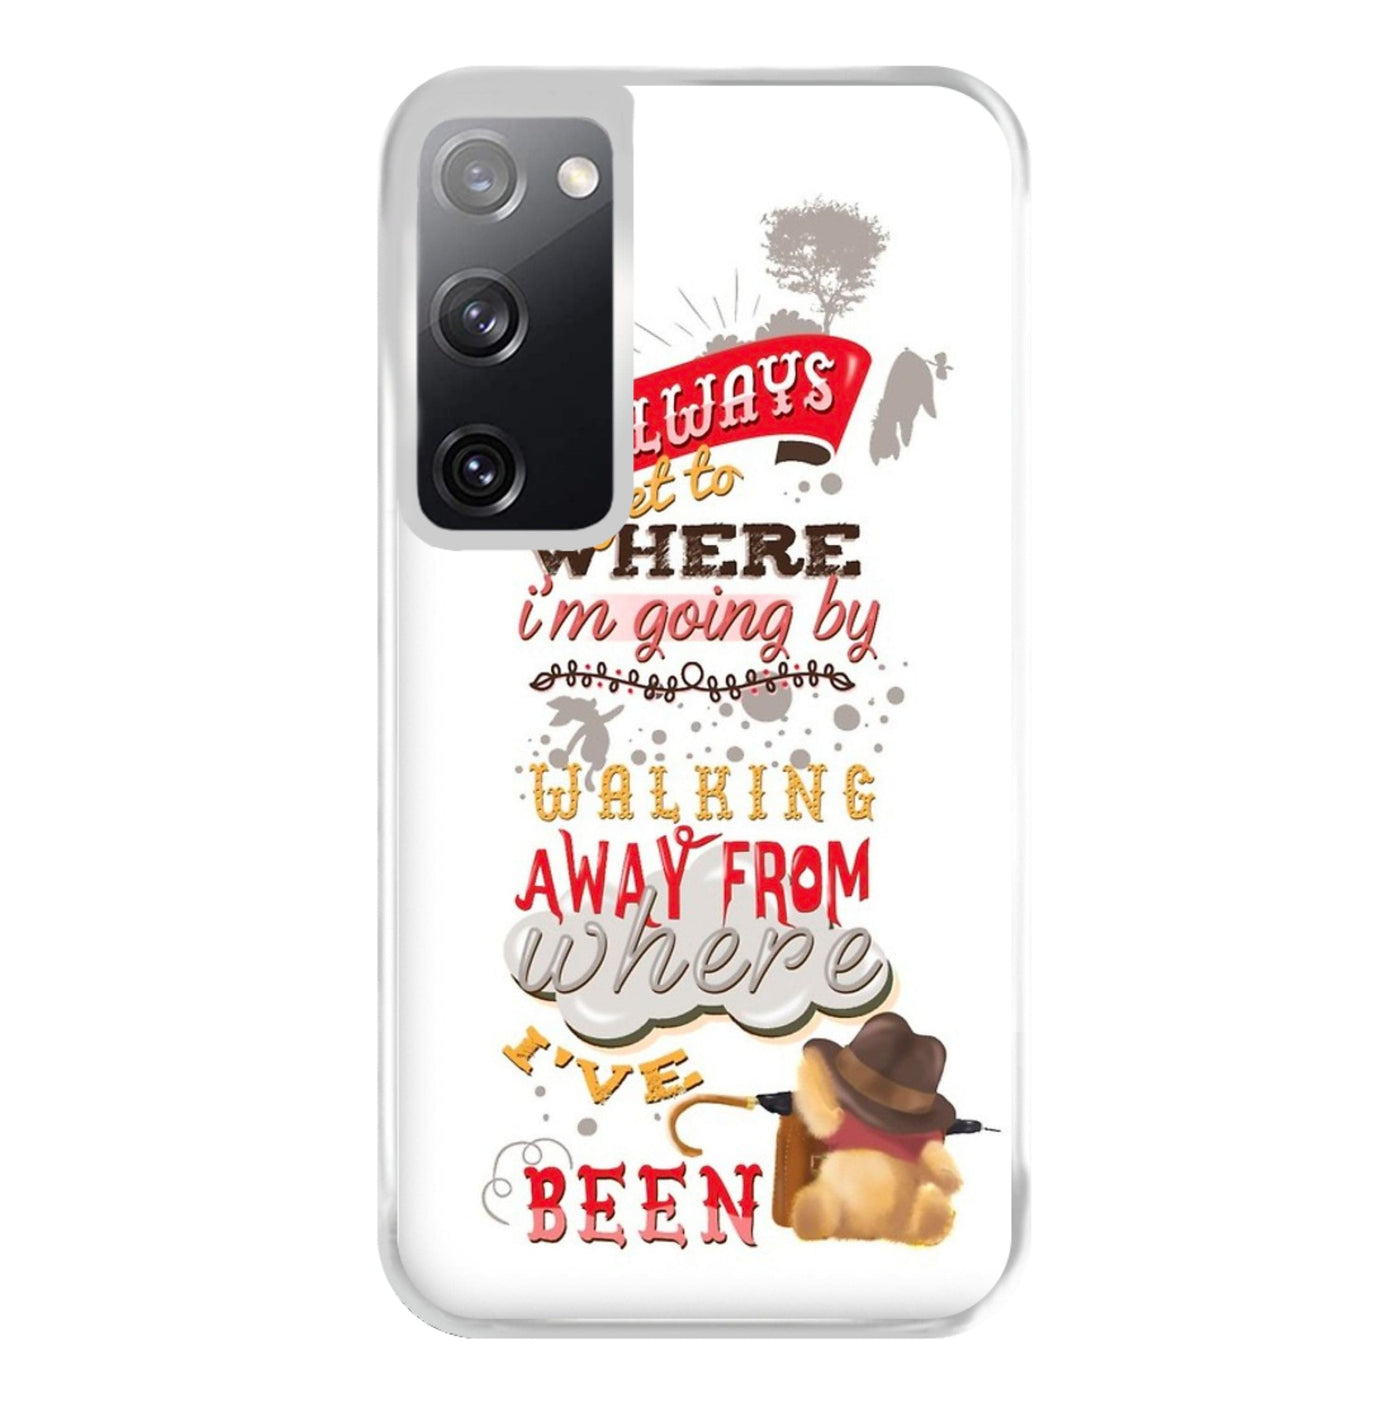 I Always Get Where I'm Going - Winnie The Pooh Quote Phone Case